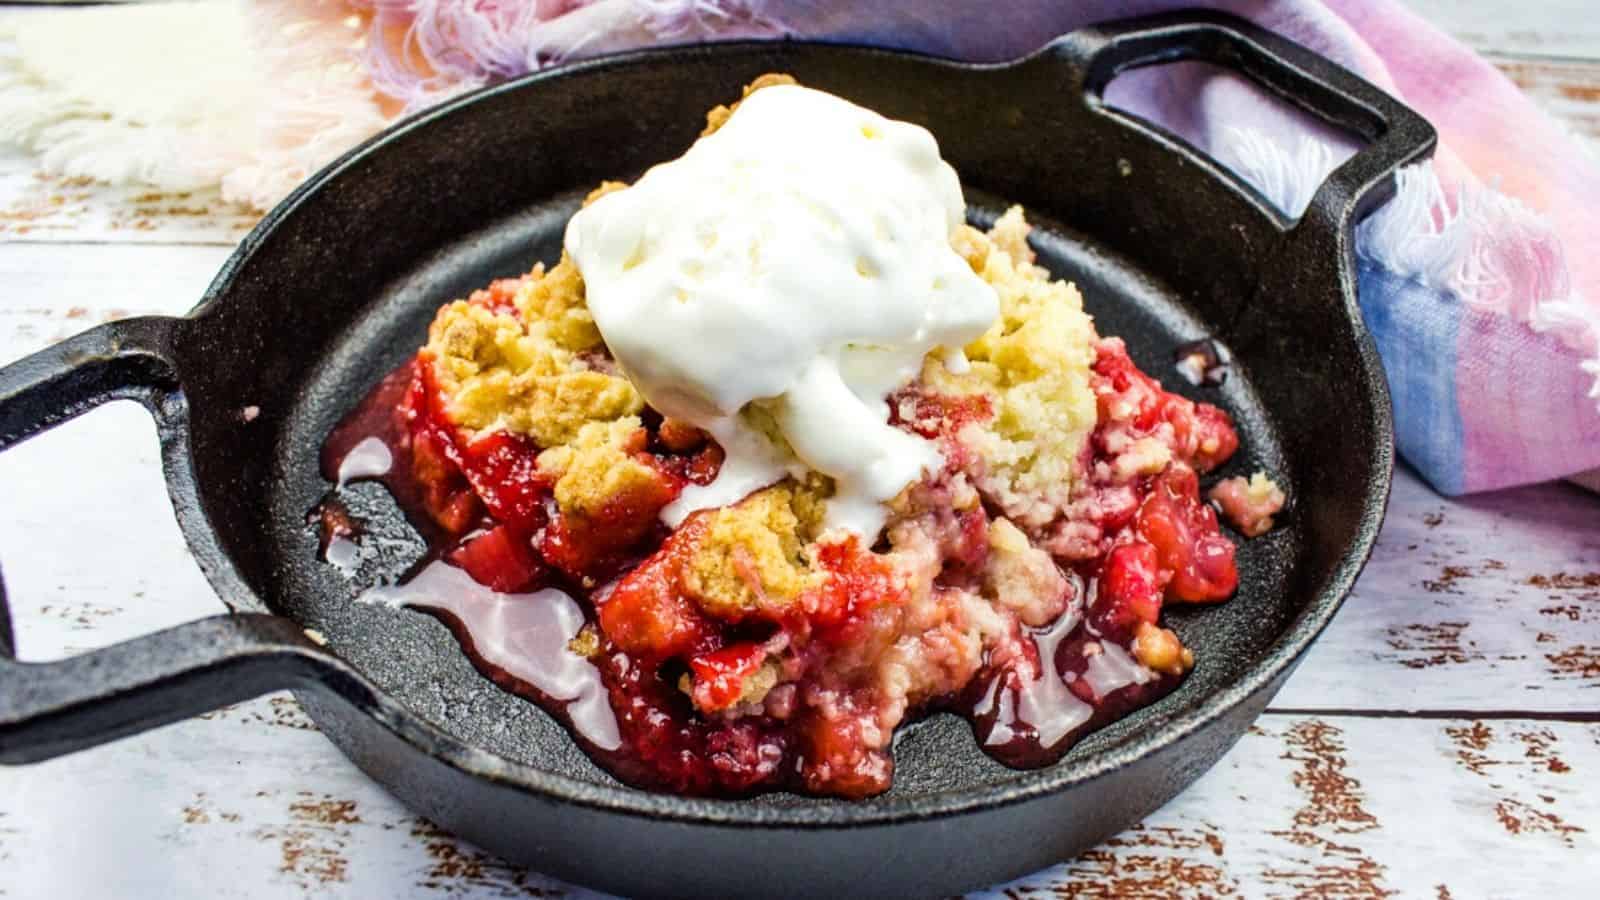 A cast iron skillet with strawberry rhubarb cobbler topped with a scoop of vanilla ice cream on a wooden surface with a cloth napkin beside it.